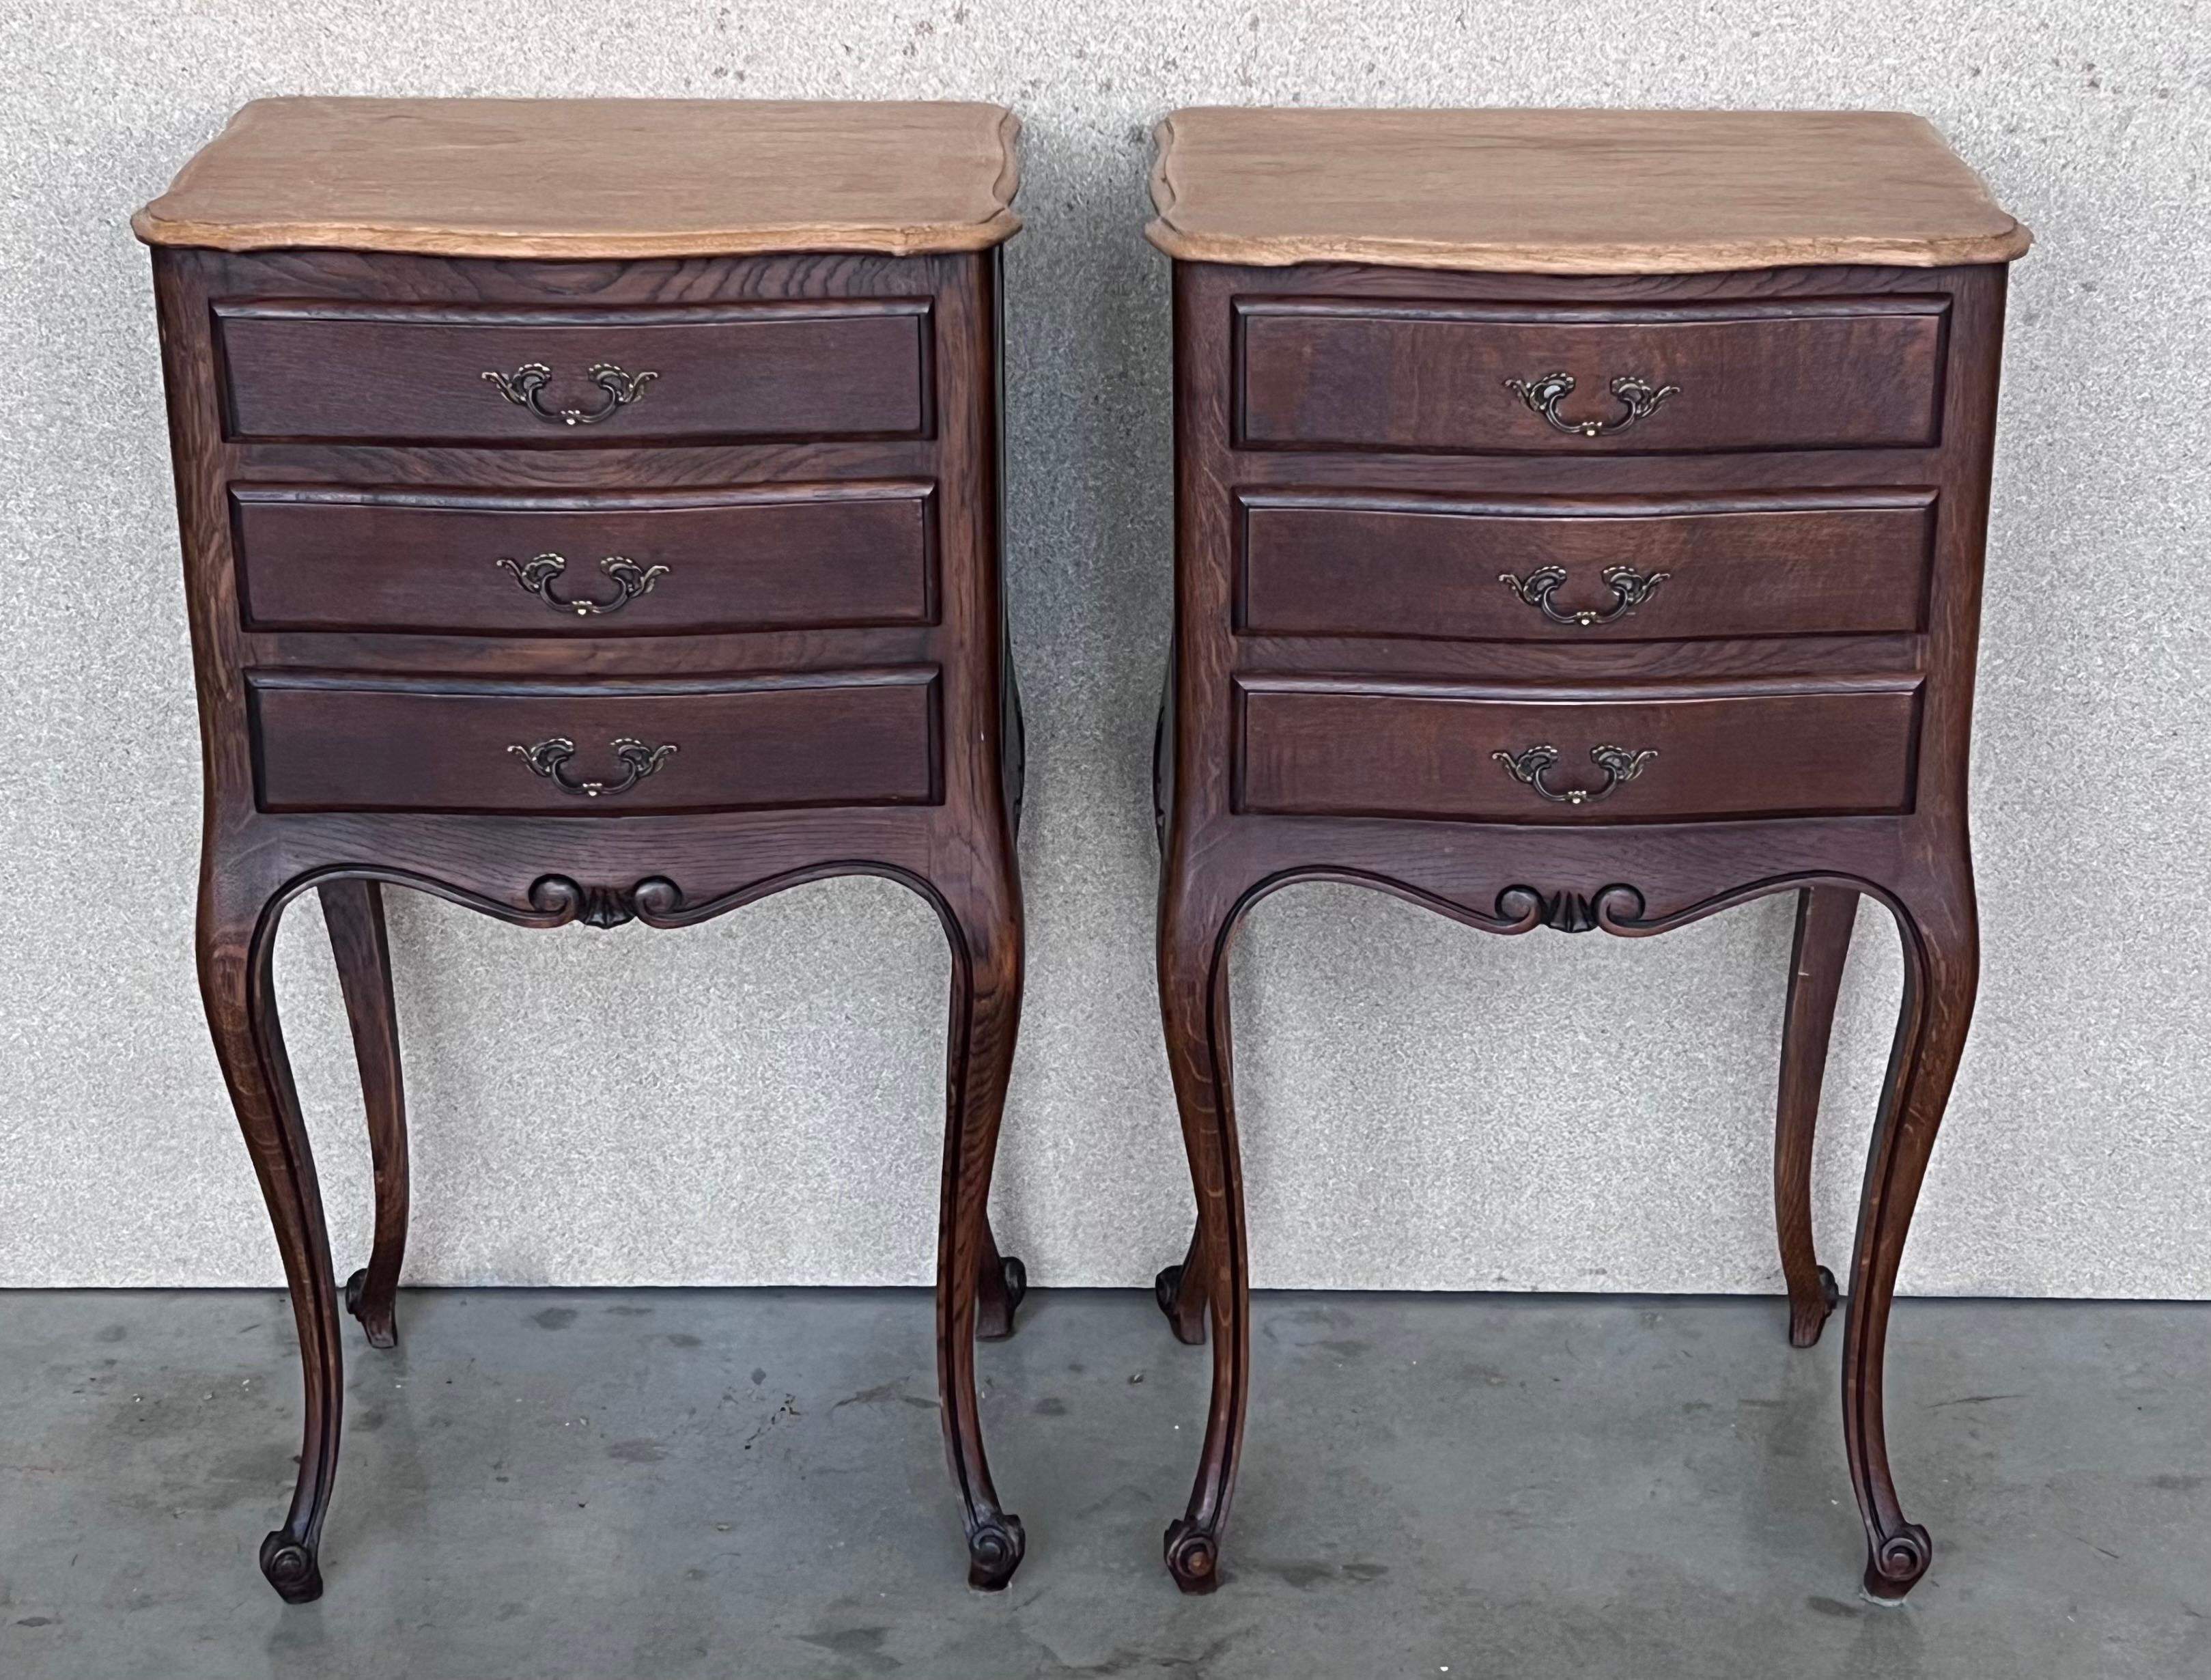 A pair of Antique French Louis XV Marquetry light oak top nightstands. Subtle contours and scroll shapes are evident in the corner posts and legs, which support serpentine sides and an arched front façade for a curvaceous effect. T Veneers with